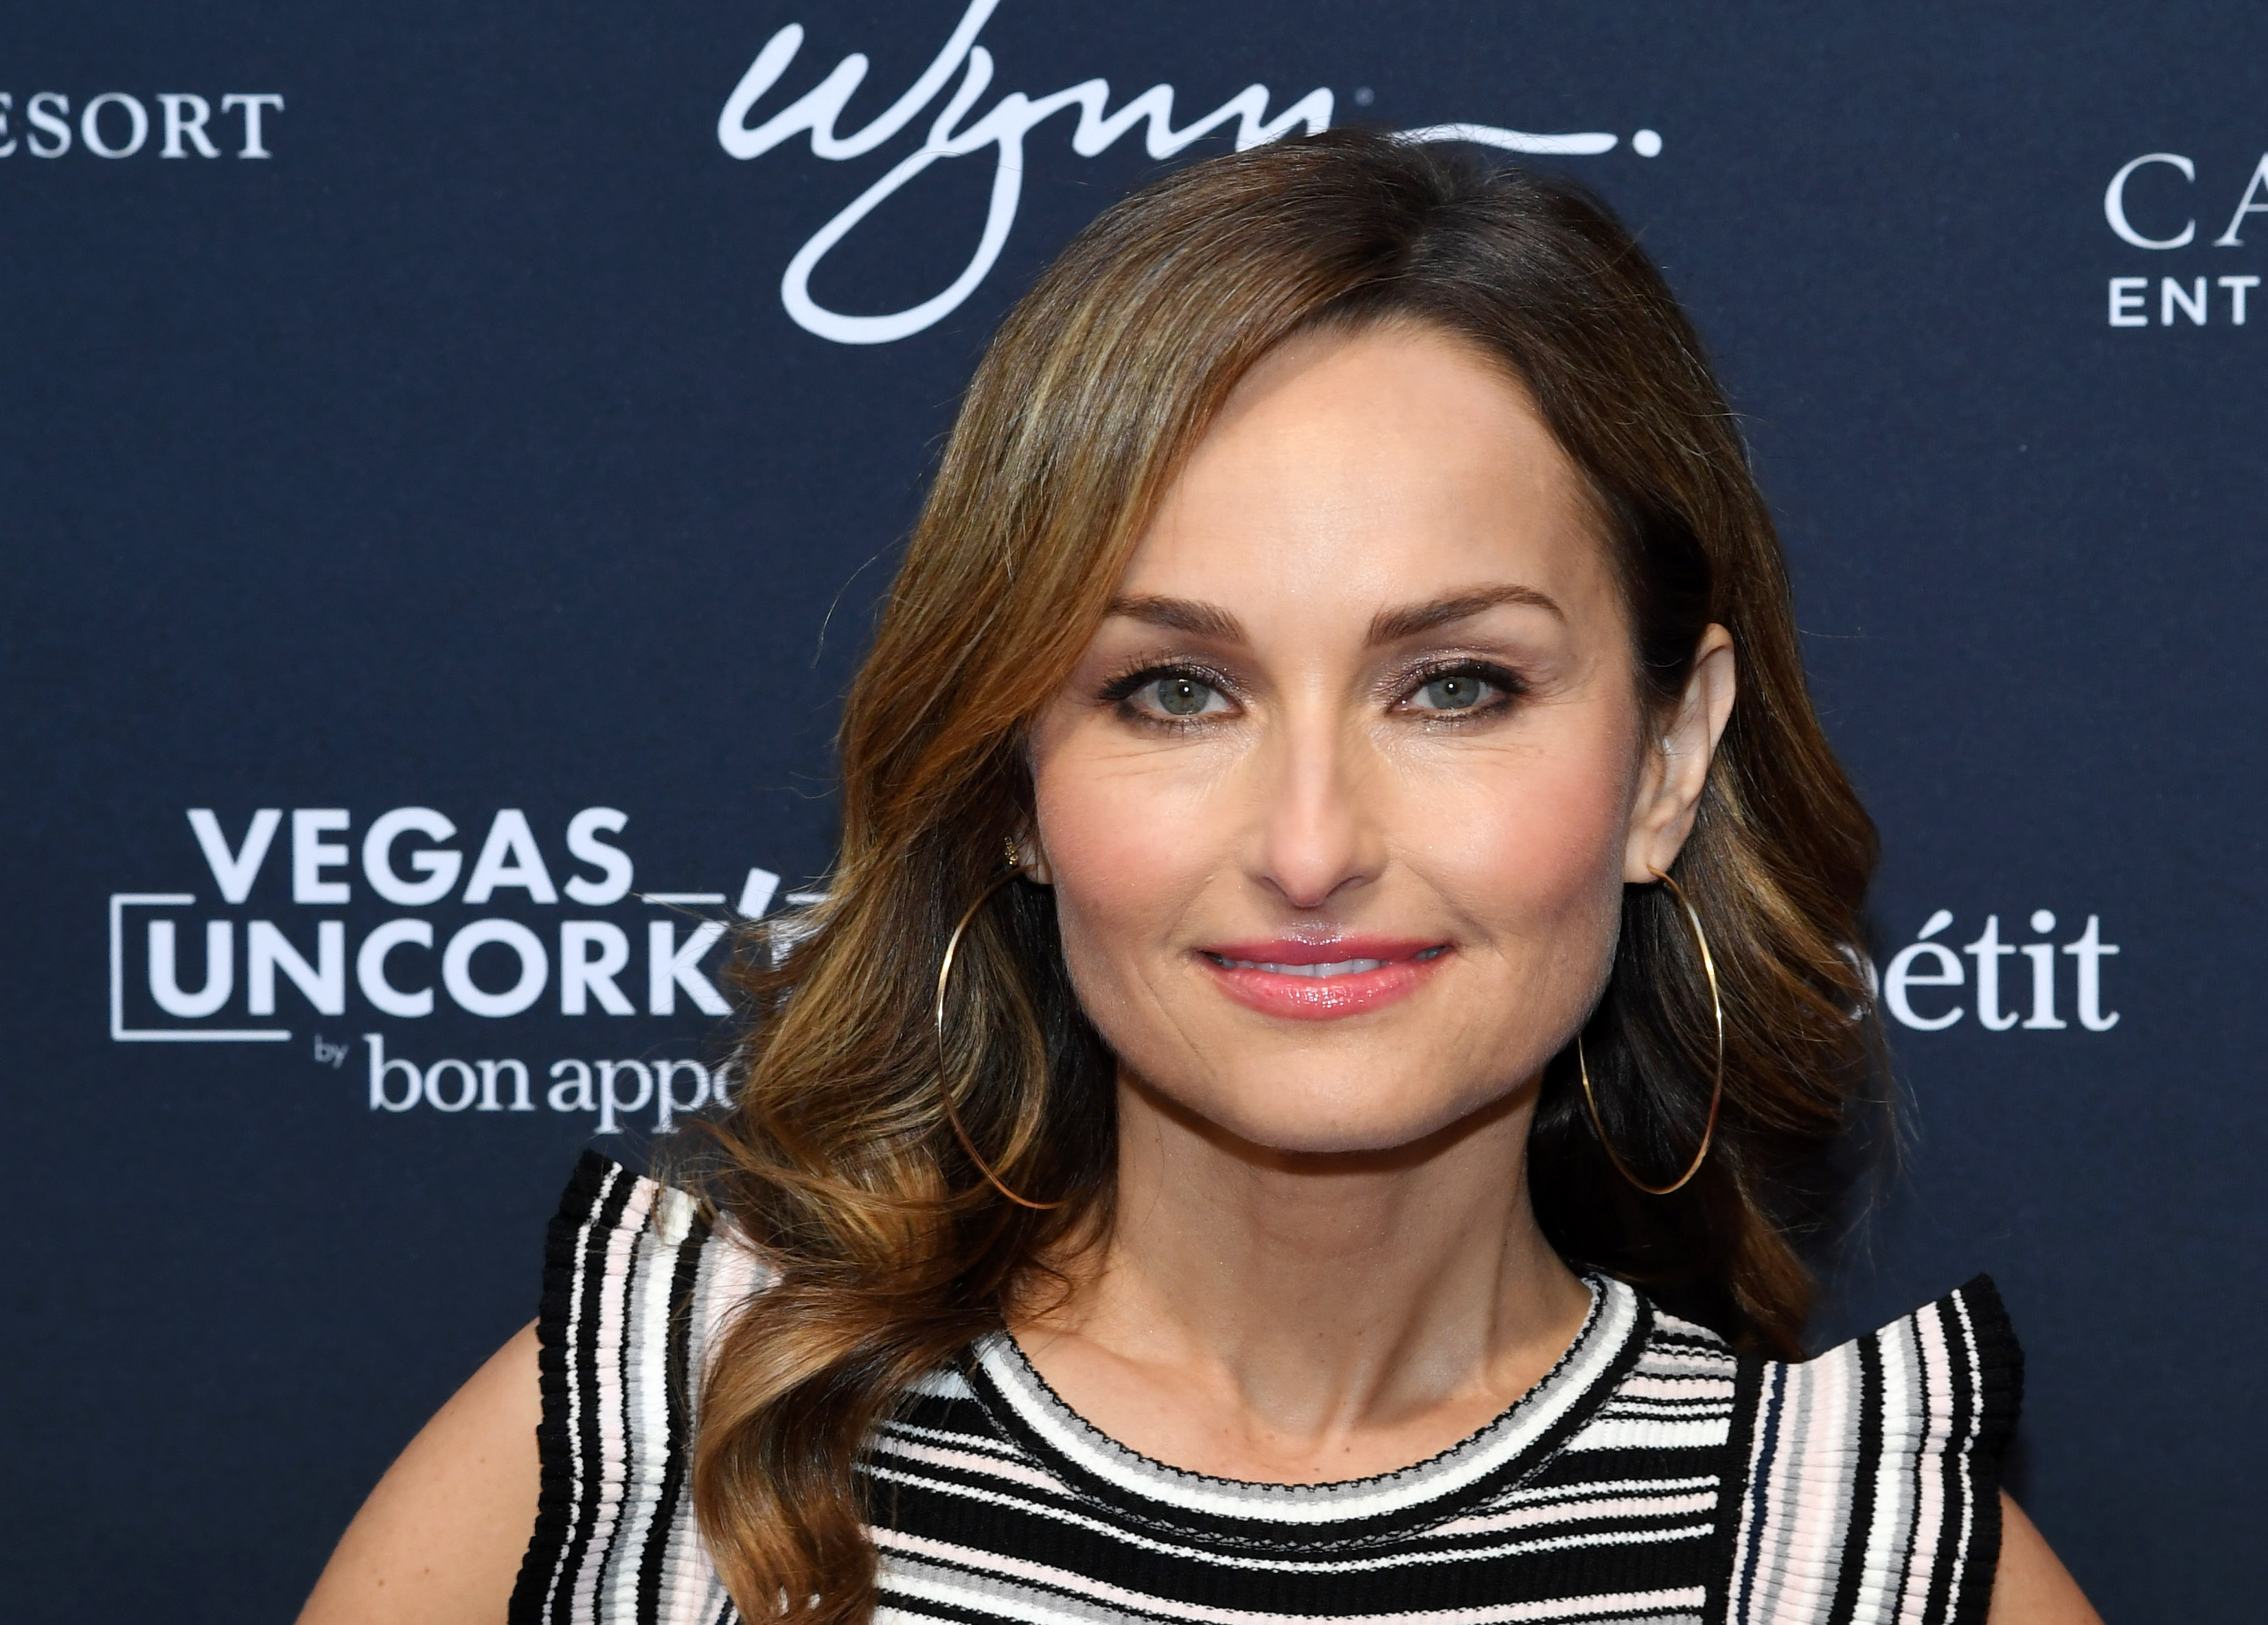 Chef Giada De Laurentiis attends the 13th annual Vegas Uncork'd by Bon Appetit Grand Tasting event presented by the Las Vegas Convention and Visitors Authority at Caesars Palace 